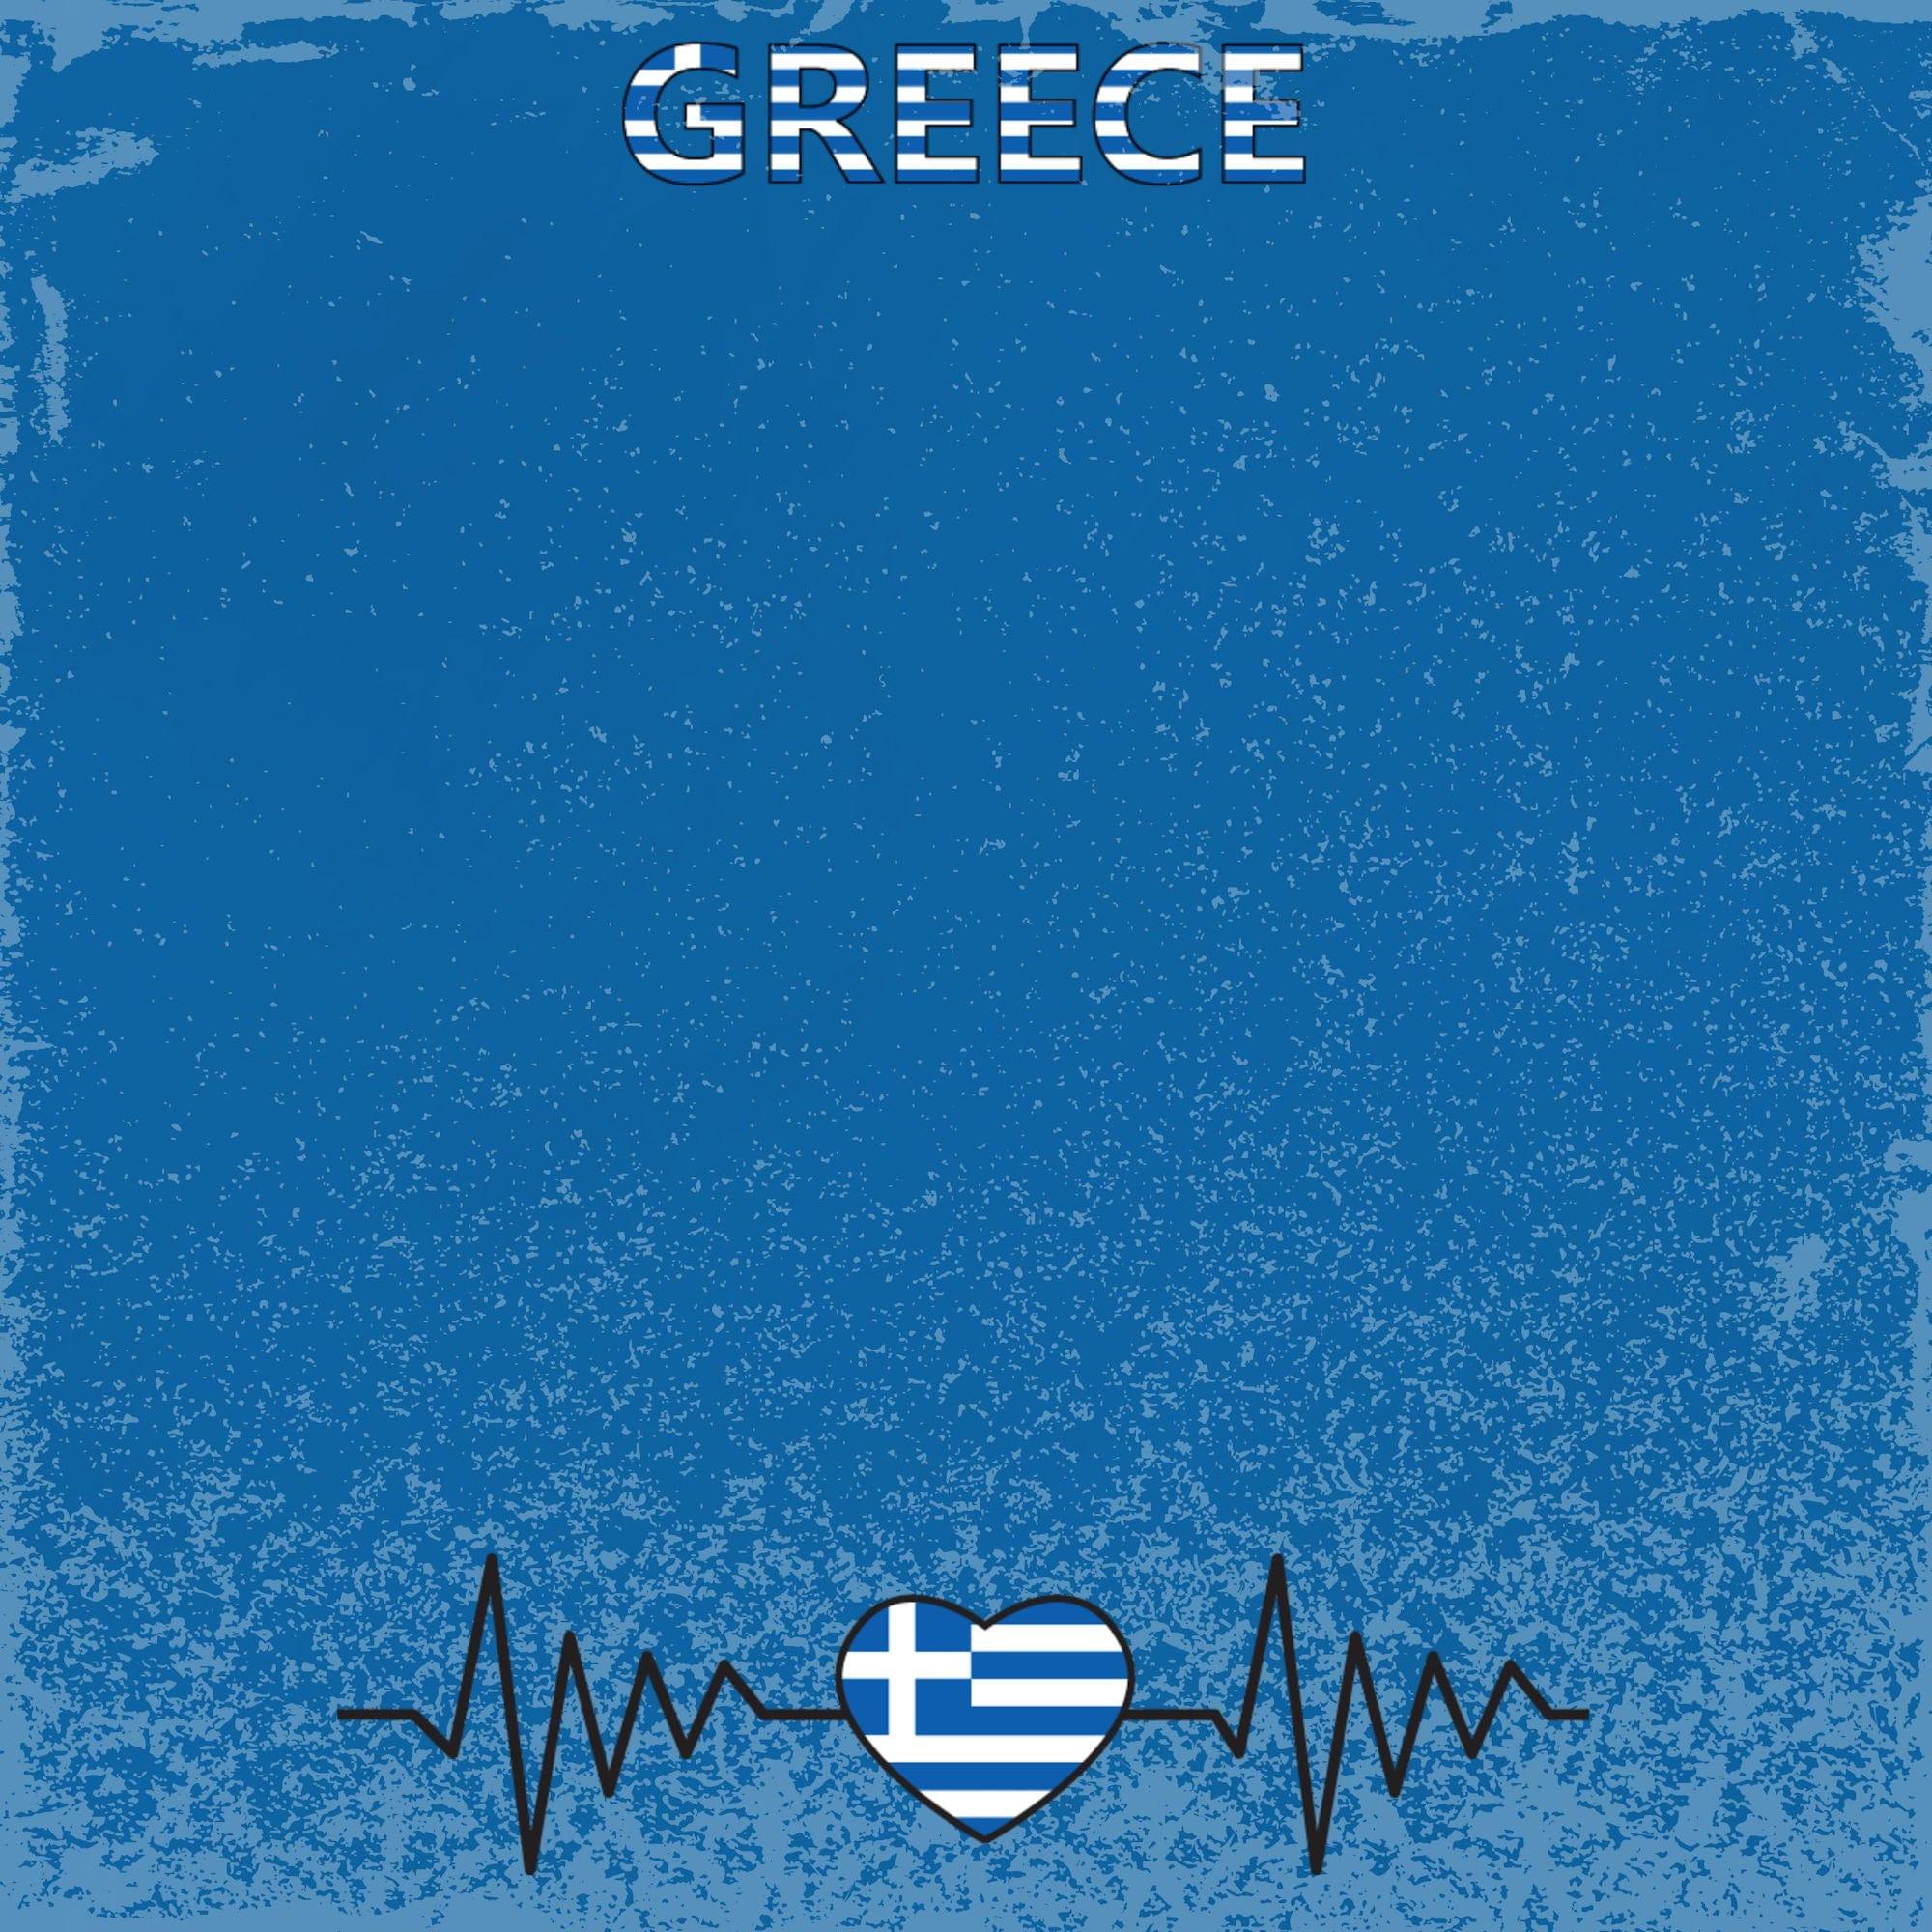 Greece Collection Greece Heartbeat 12 x 12 Double-Sided Scrapbook Paper by SSC Designs - Scrapbook Supply Companies